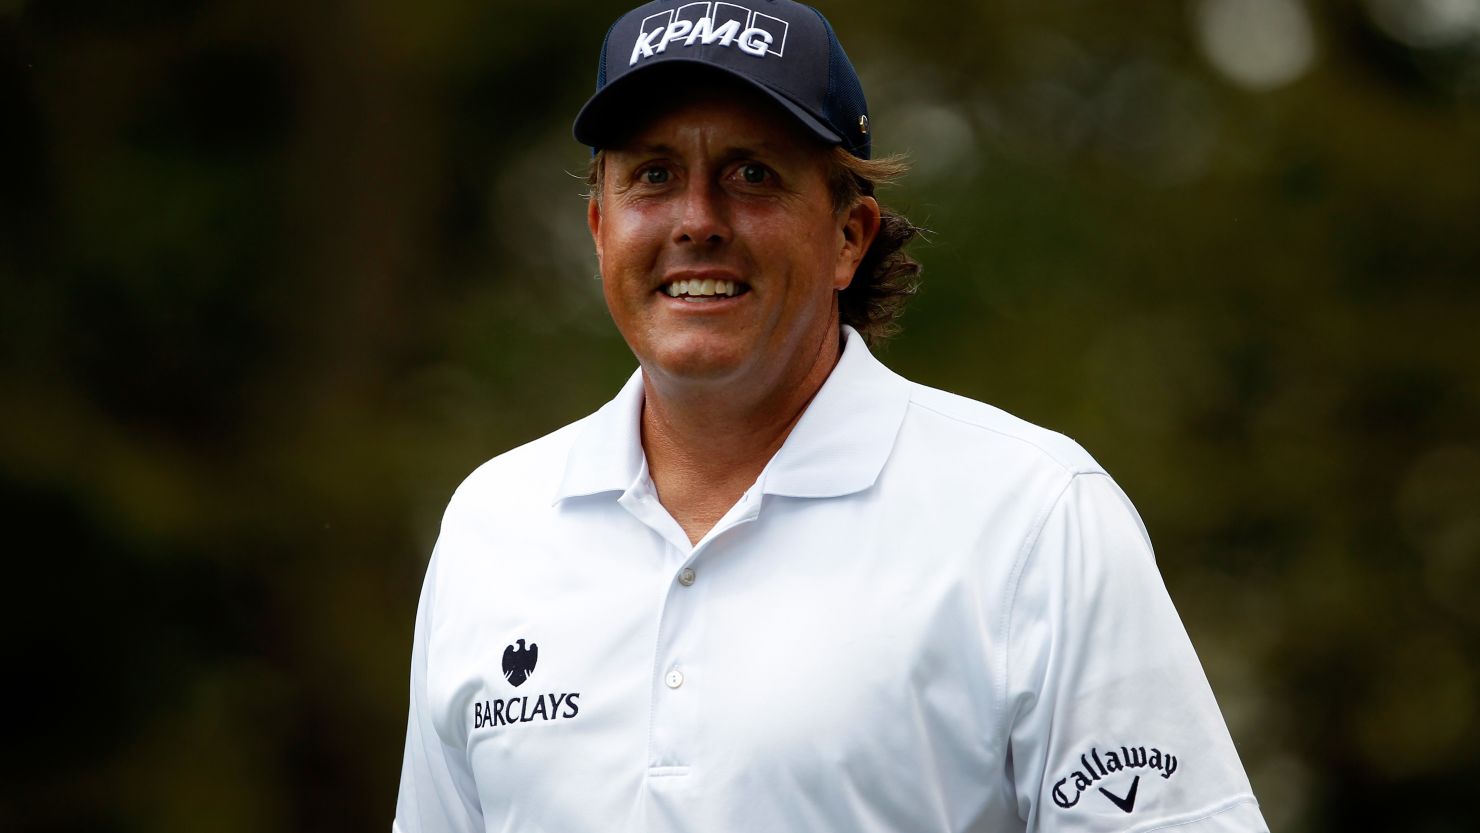 Phil Mickelson's round of 64 at Crooked Stick on Saturday earned him a tie for the lead with Vijay Singh